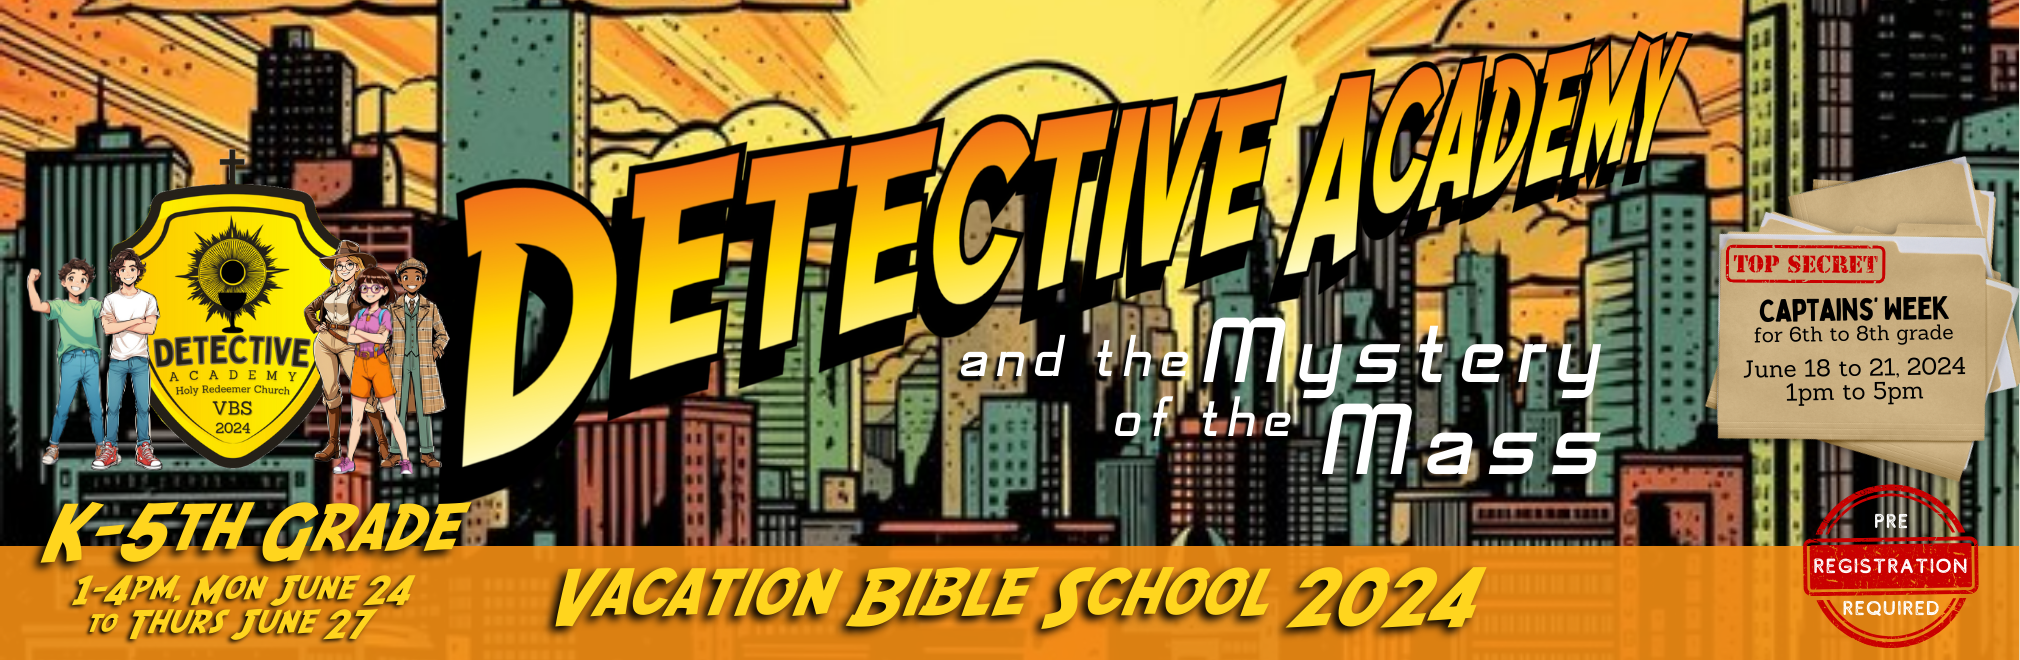 VBS 2024 Web banner (2020 x 660 px).png